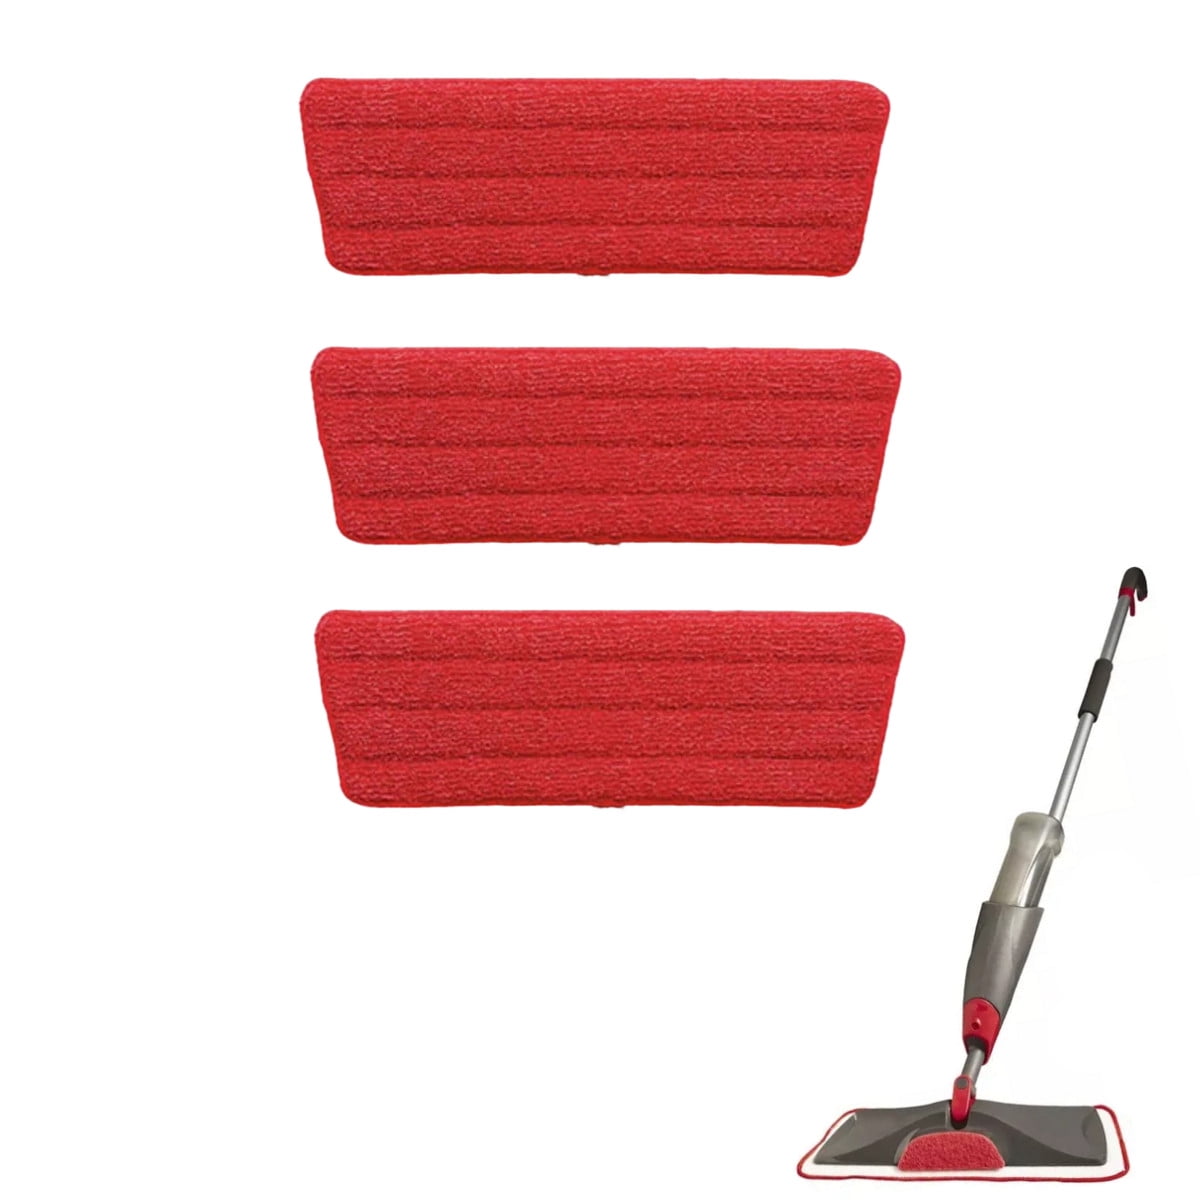 LANMU Microfiber Mop Pads Replacement Heads Compatible with Rubbermaid  Reveal Spray Mop, 3 Pack 16.5 x 5.5 Washable & Reusable Mop Refills and 2